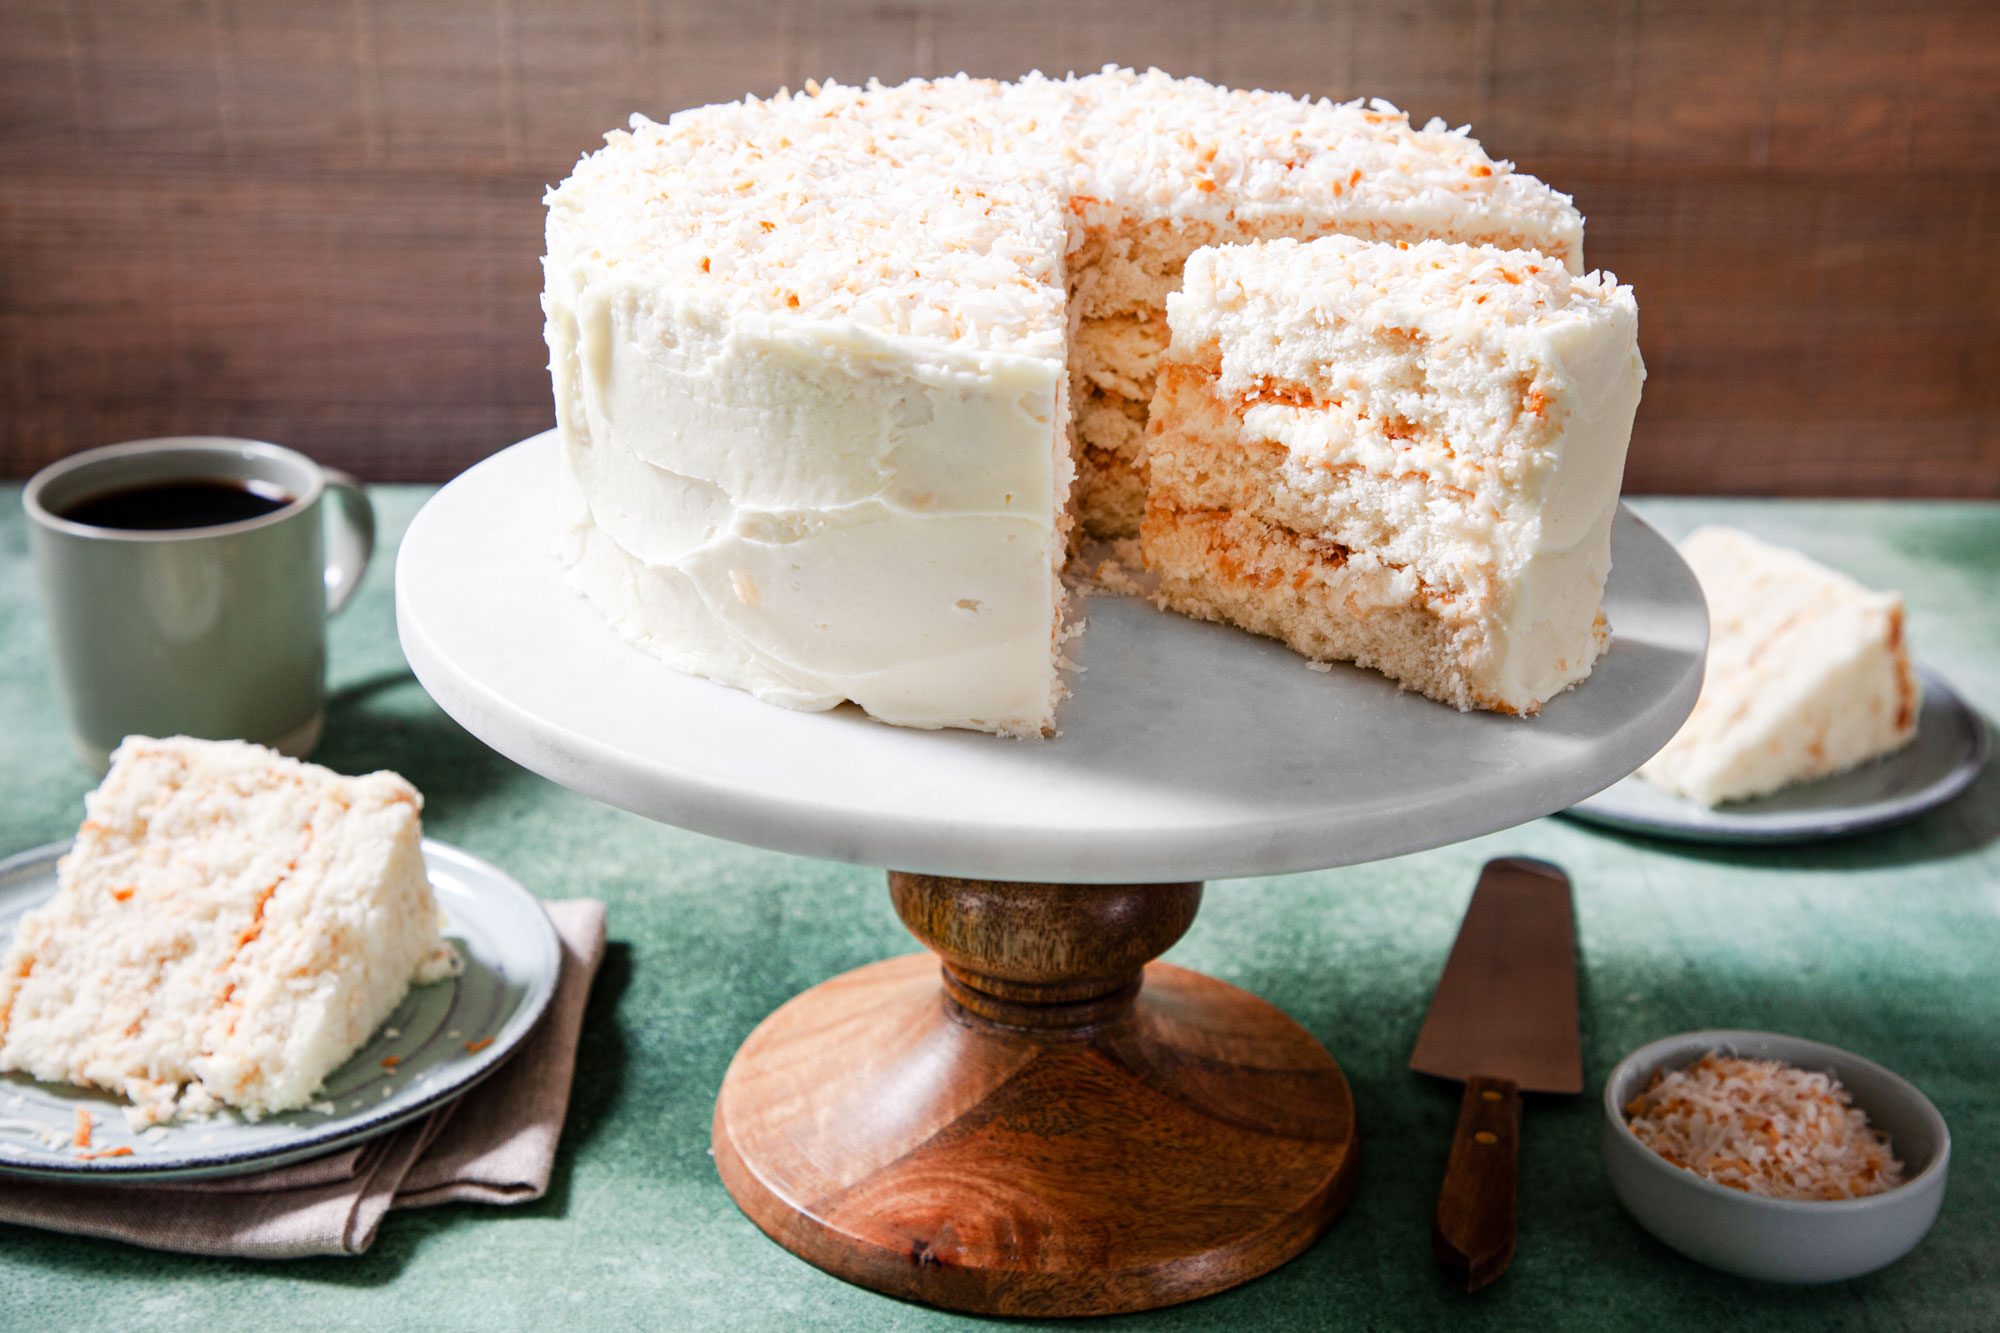 A delicious coconut cake presented on a cake stand